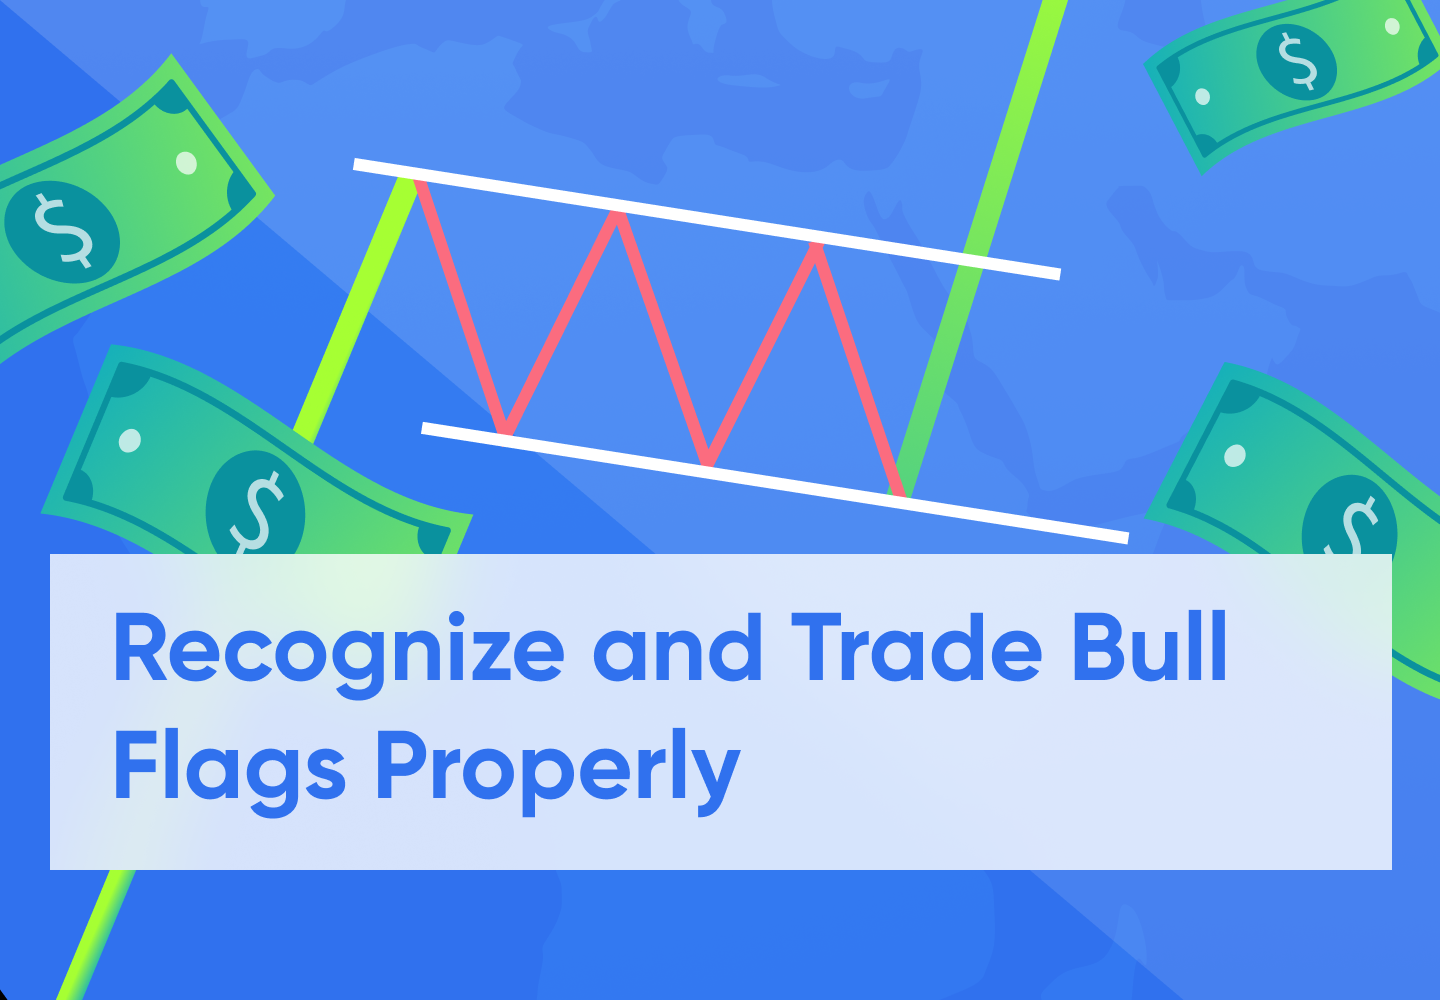 Bull flag: What is it and how to trade it